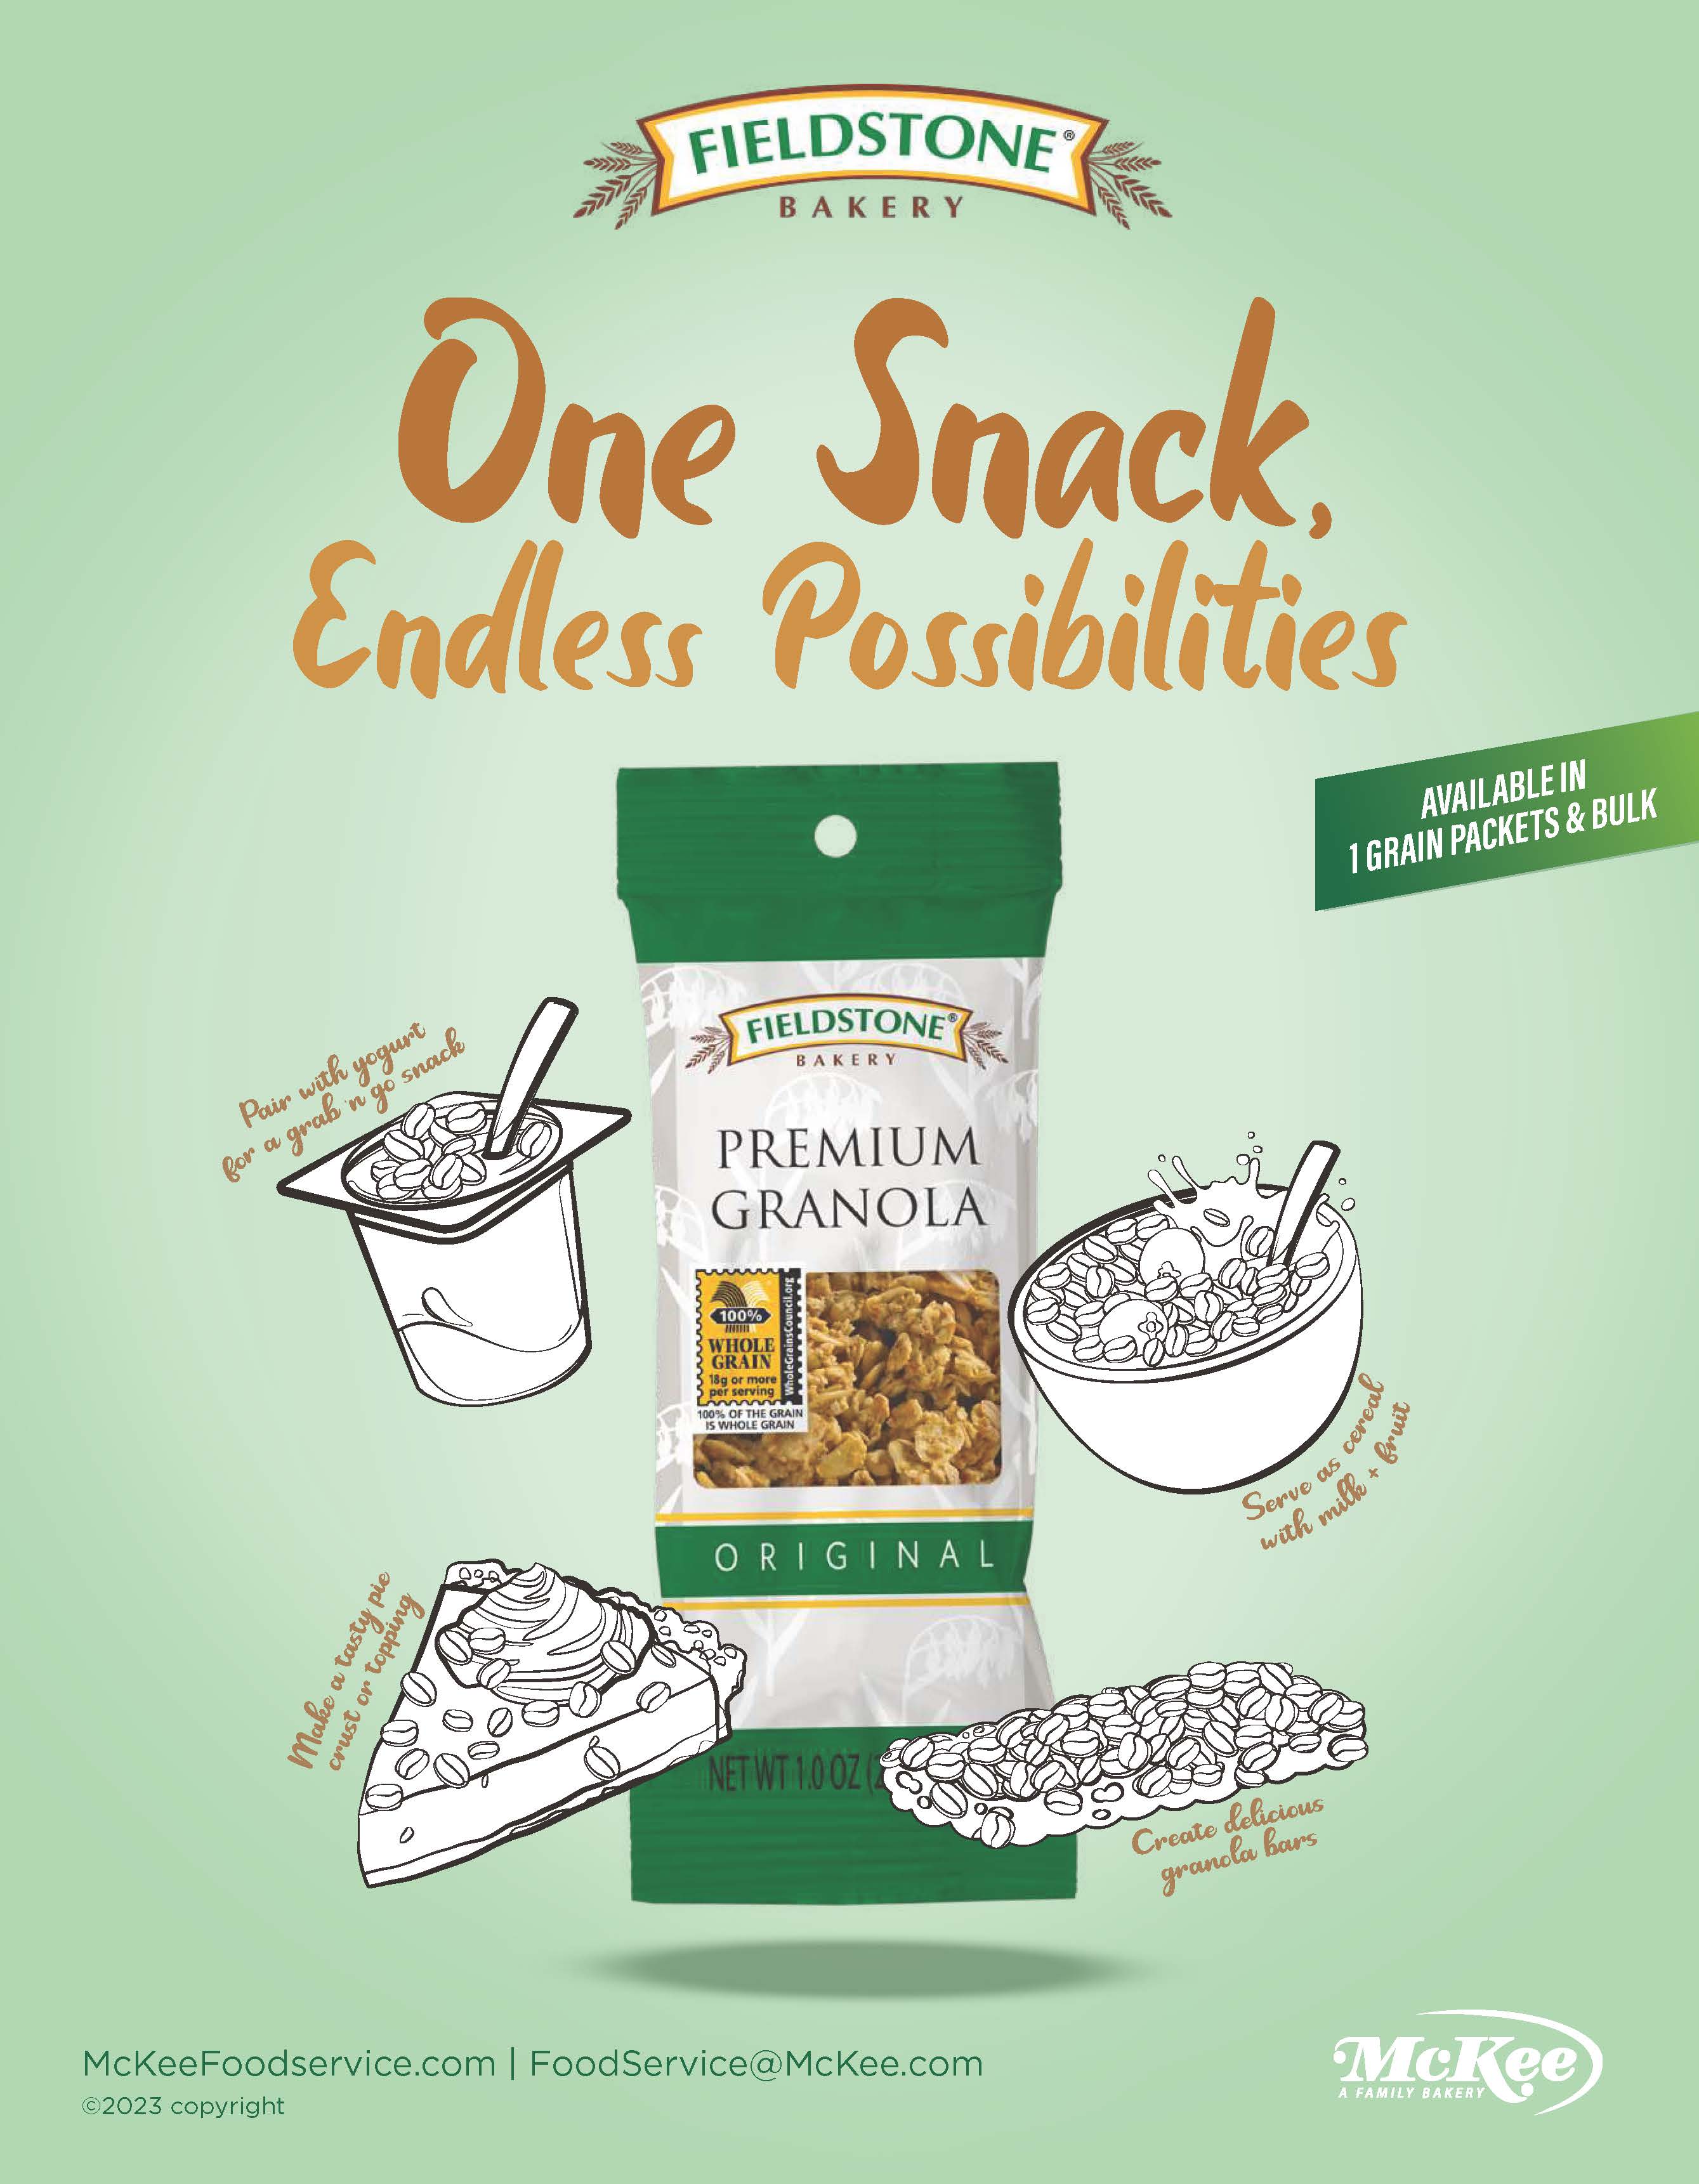 Endless possibilities of Snacking & Baking